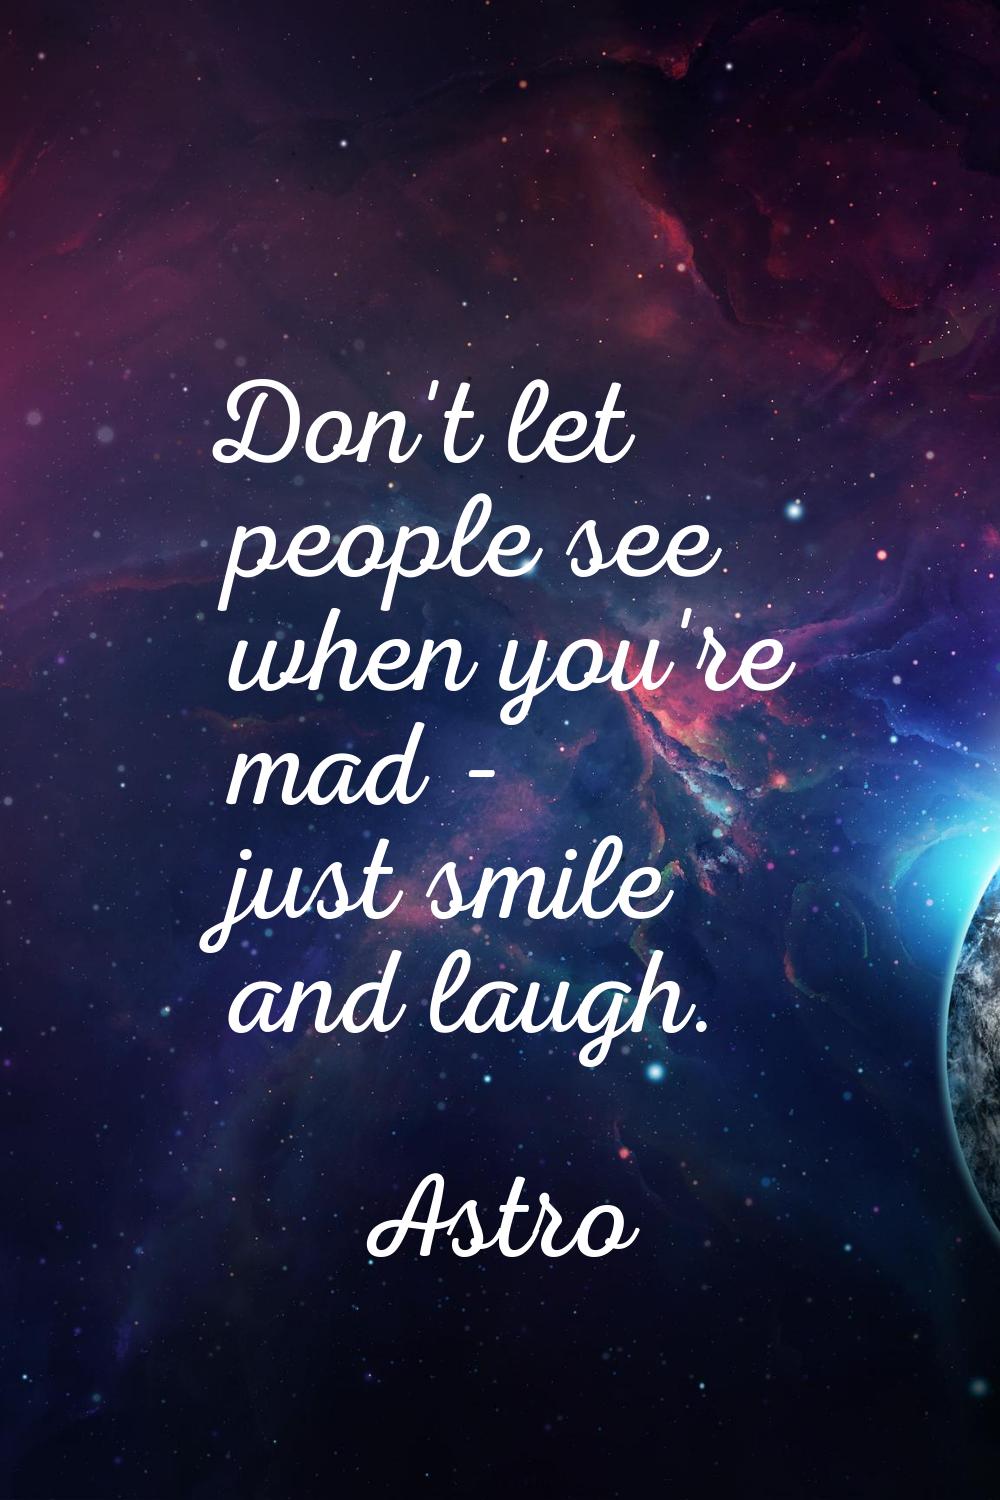 Don't let people see when you're mad - just smile and laugh.